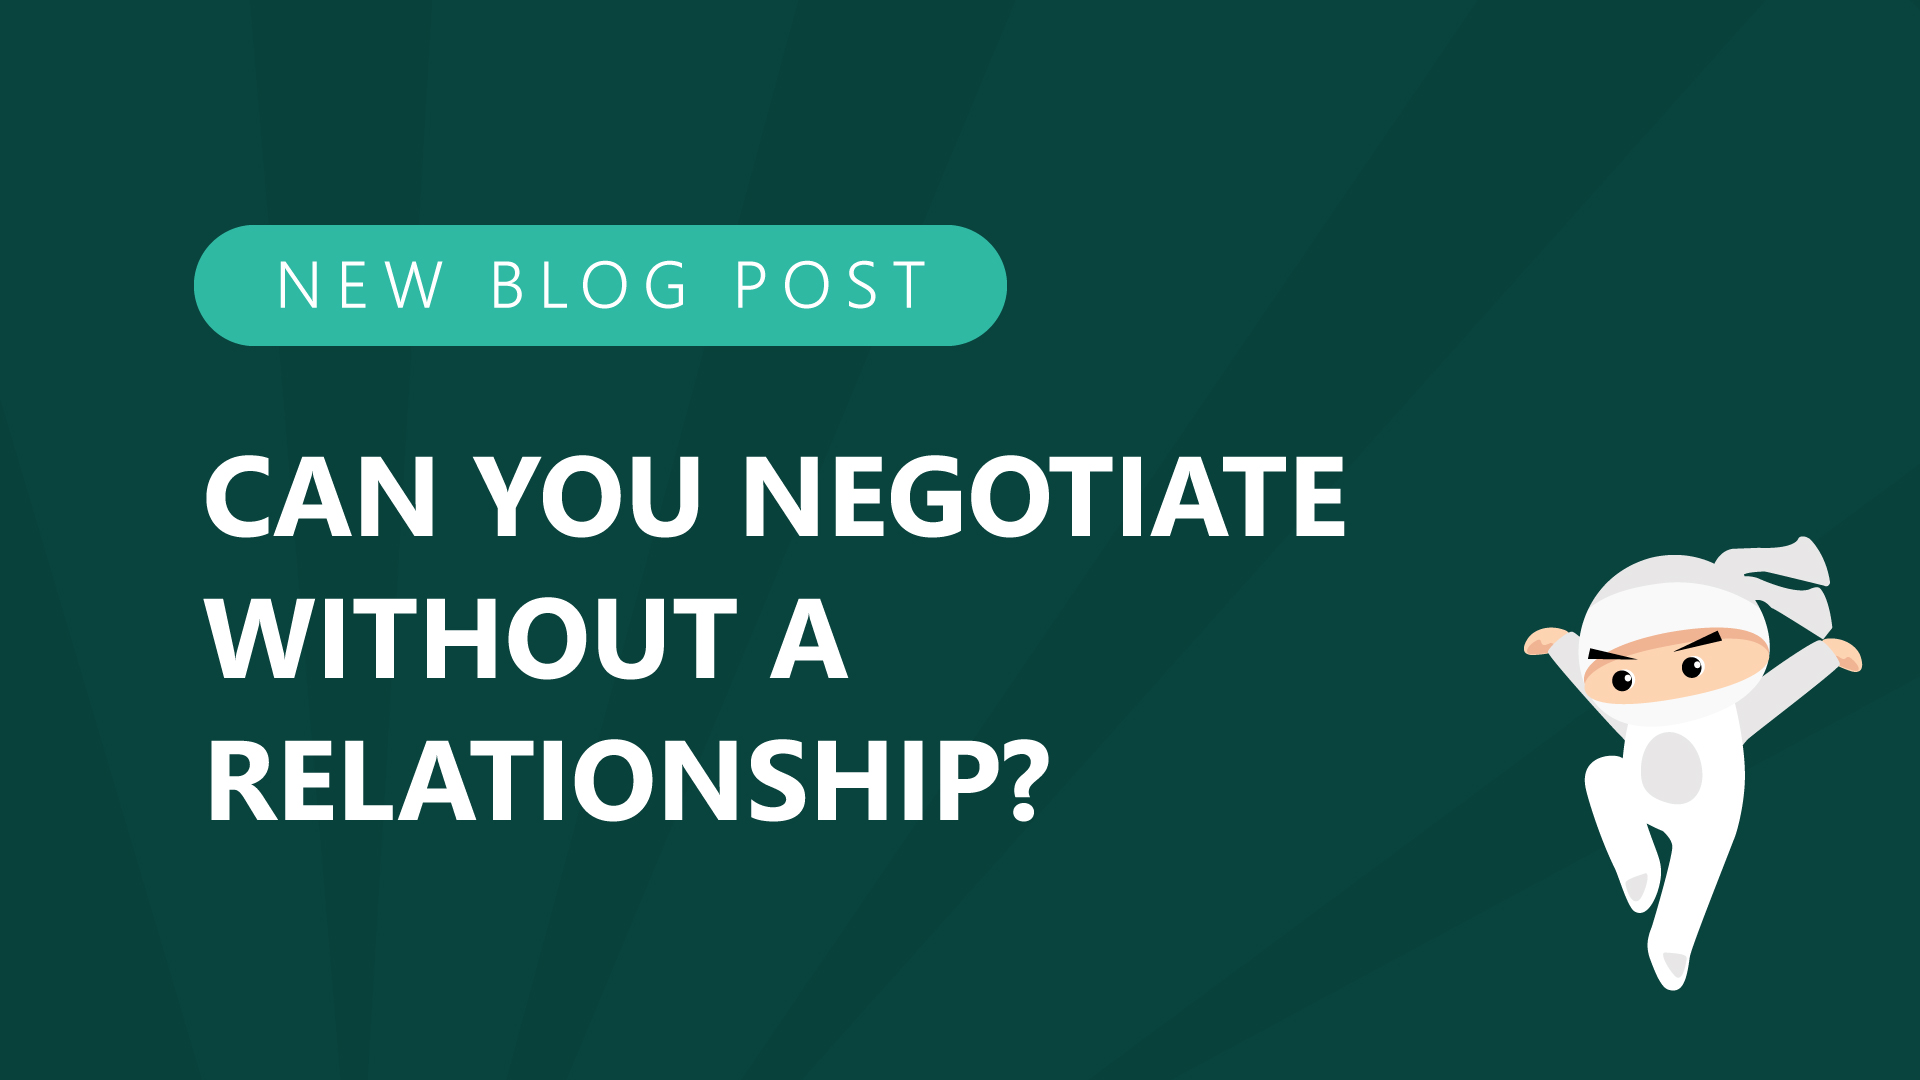 Can you negotiate without a relationship?